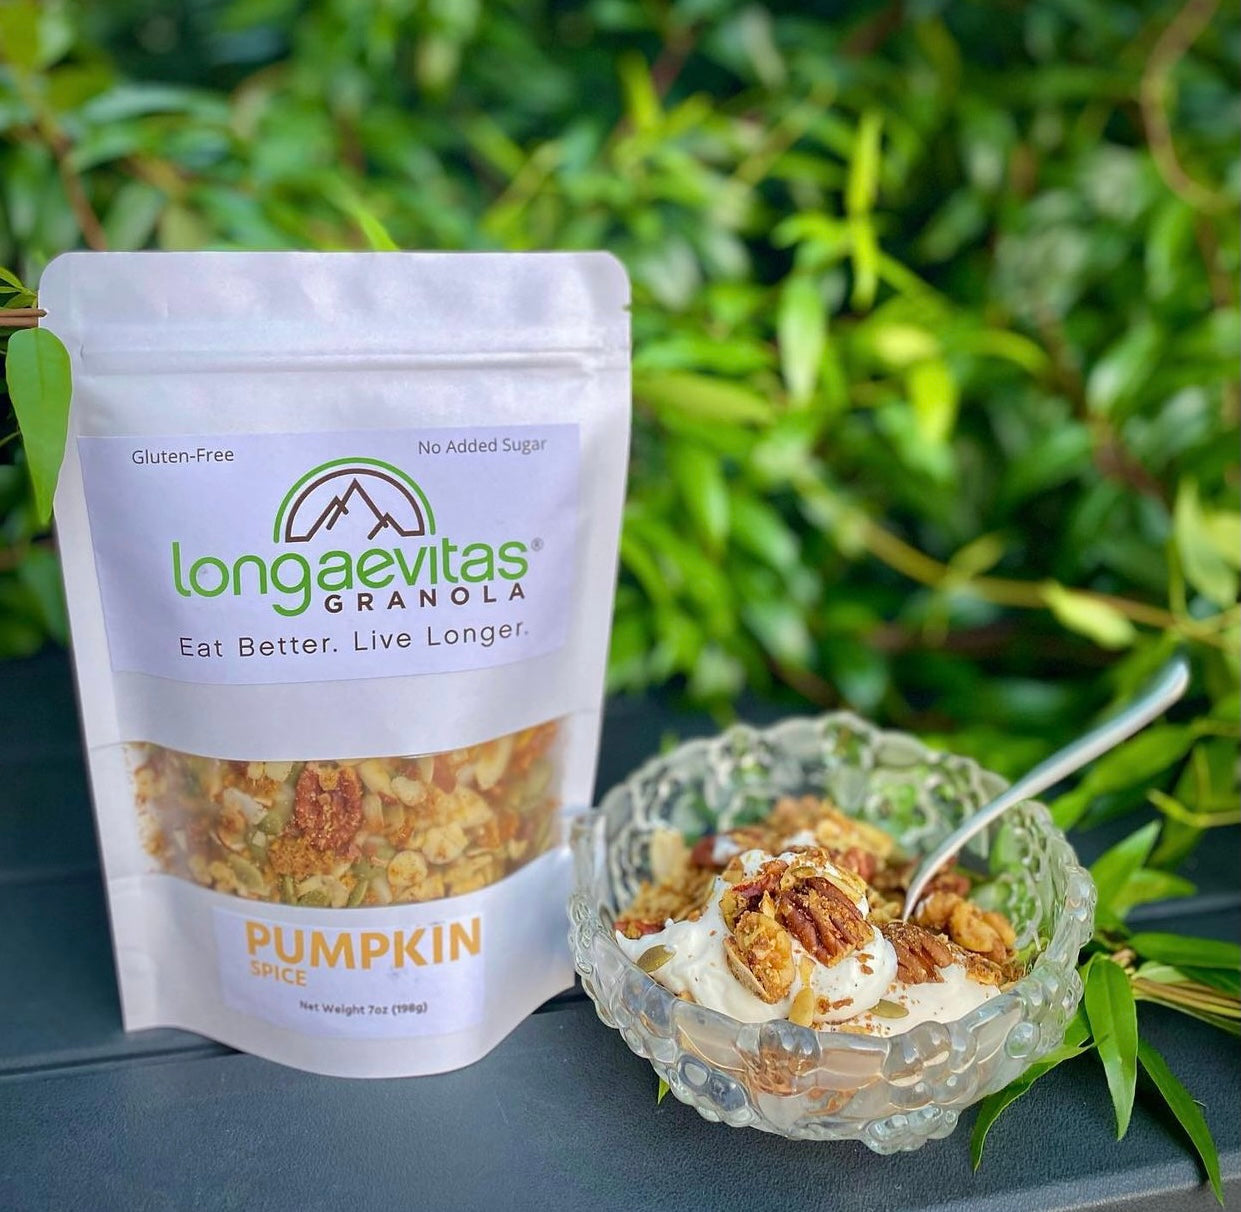 Longaevitas PUMPKIN Spice Granola pictured with a bowl of fresh whipped cream (No Sugar Added)